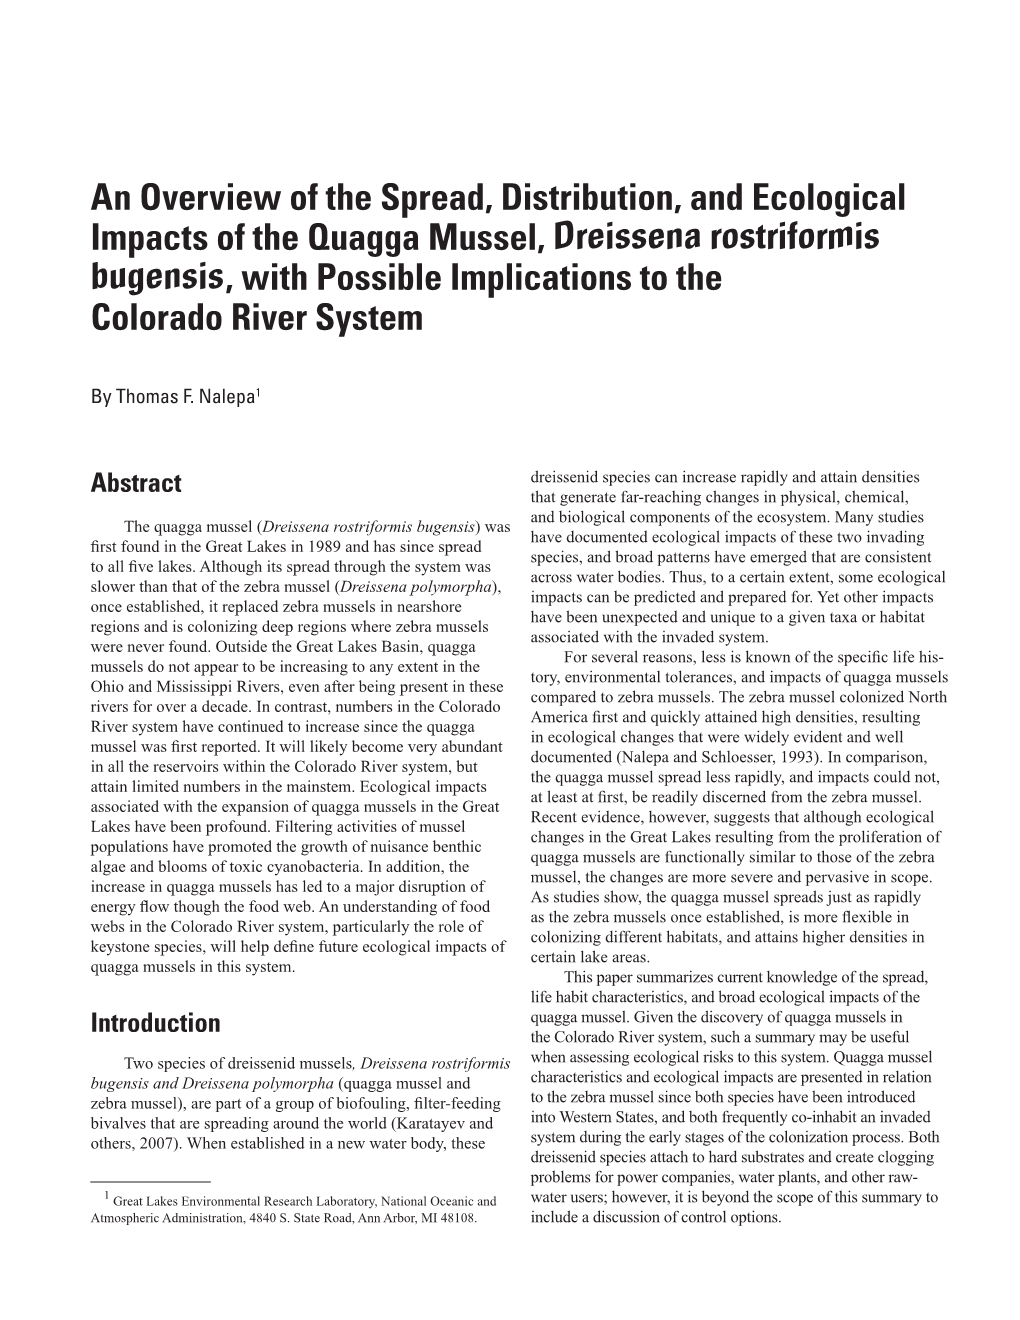 An Overview of the Spread, Distribution, and Ecological Impacts